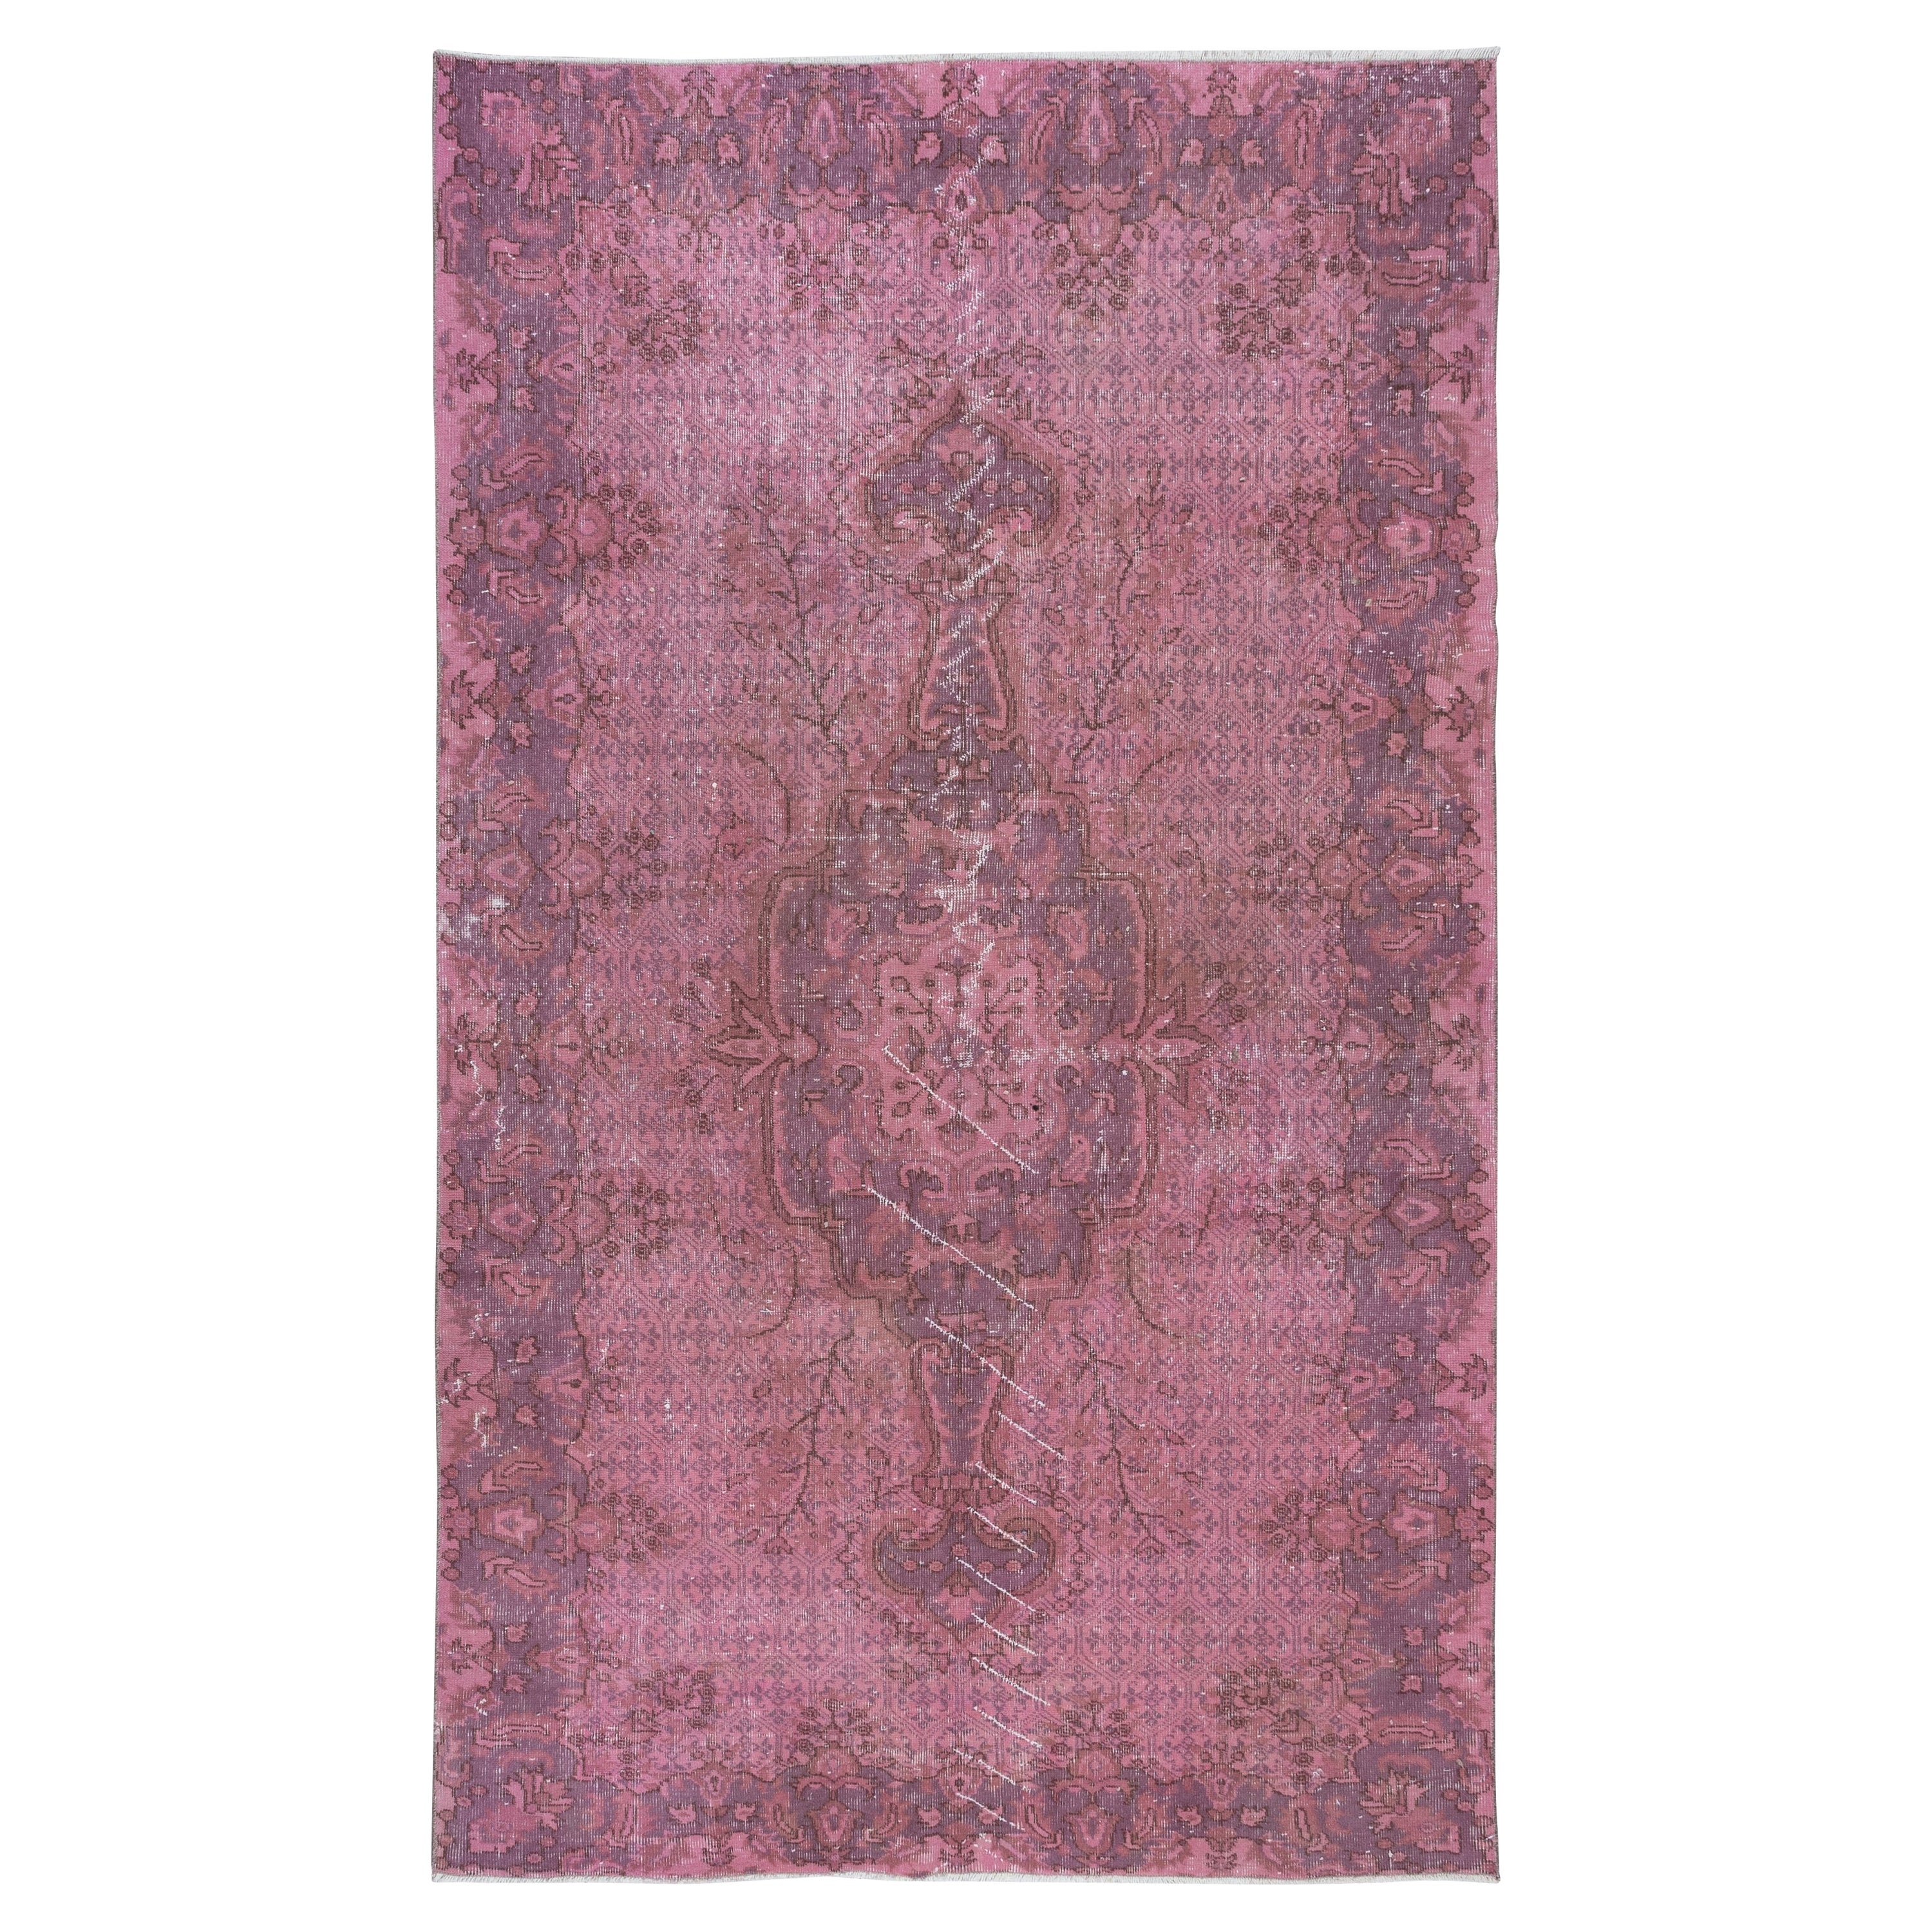 5.4x9 Ft Pink & Violet Purple Handmade Area Rug from Turkey, Room Size Carpet For Sale